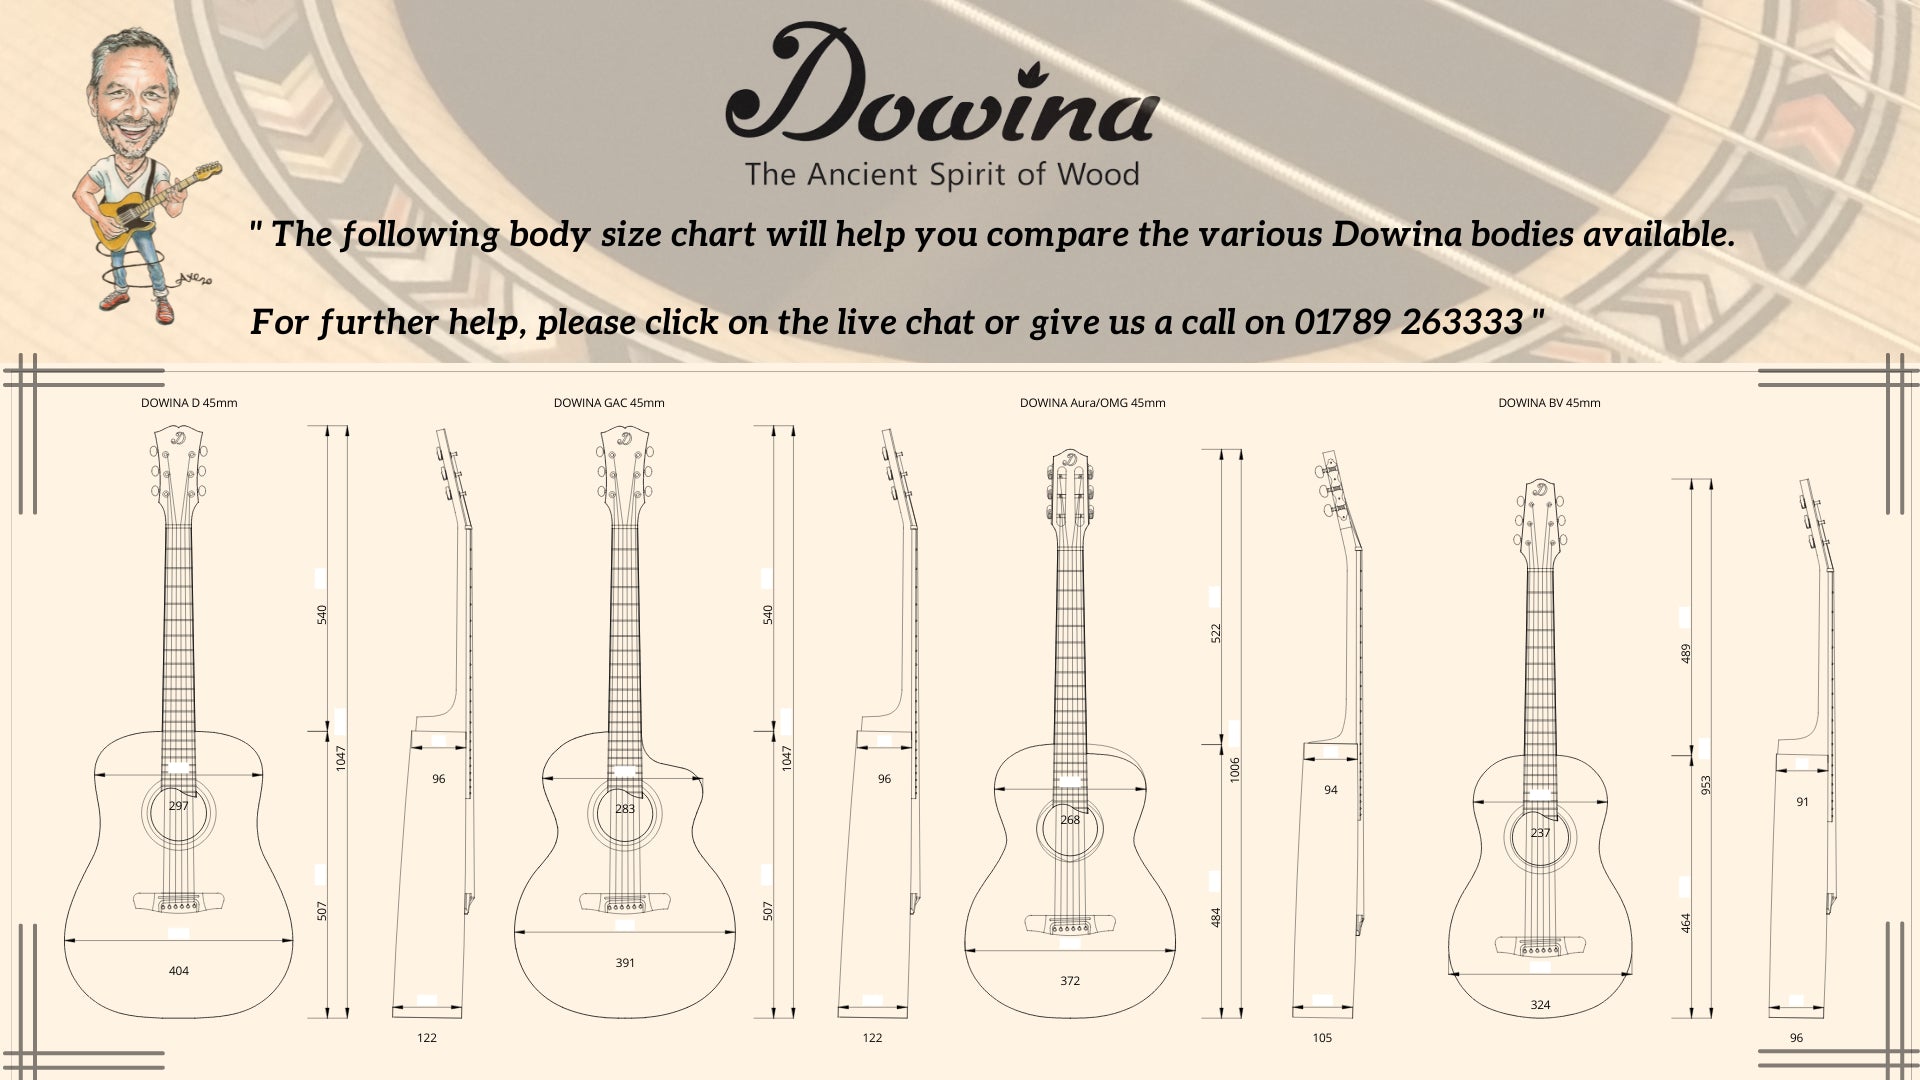 Dowina Rosewood (Ceres) HC Hyvibe Hybrid Nylon String Cutaway Left Handed, Nylon Strung Guitar for sale at Richards Guitars.